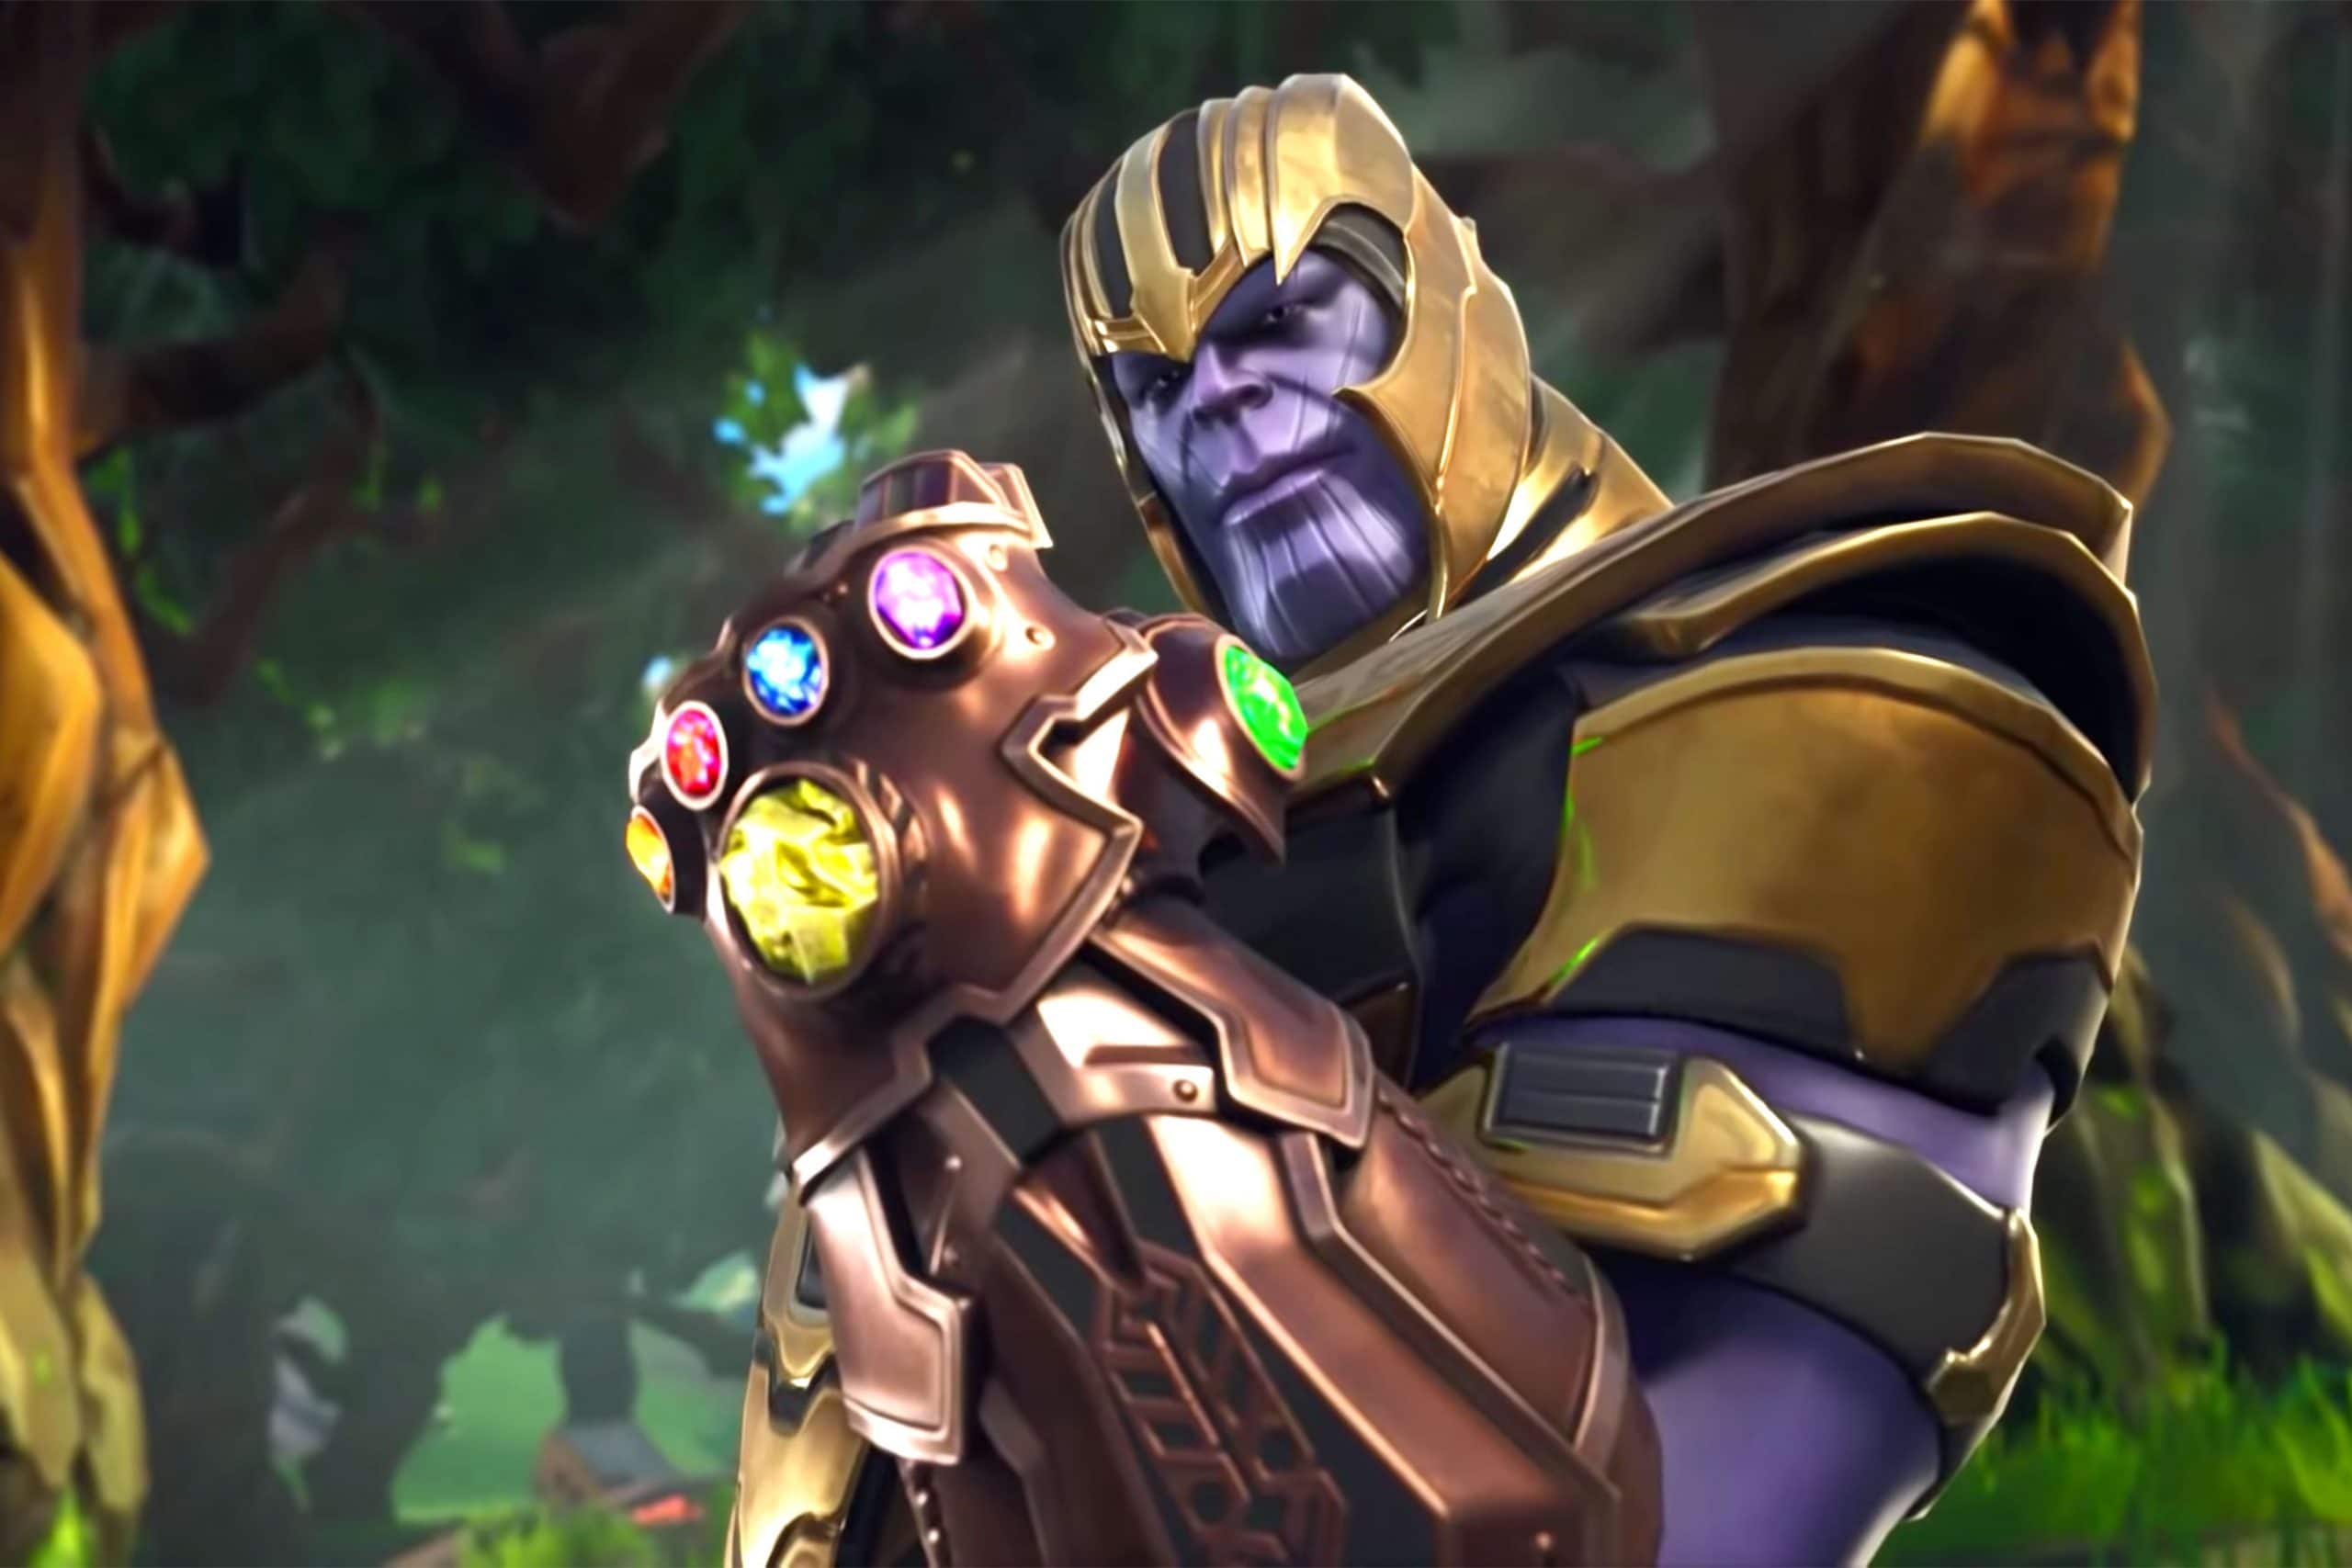 Check out Avenger: Endgame Fan’s hyperrealistic Thanos tattoo